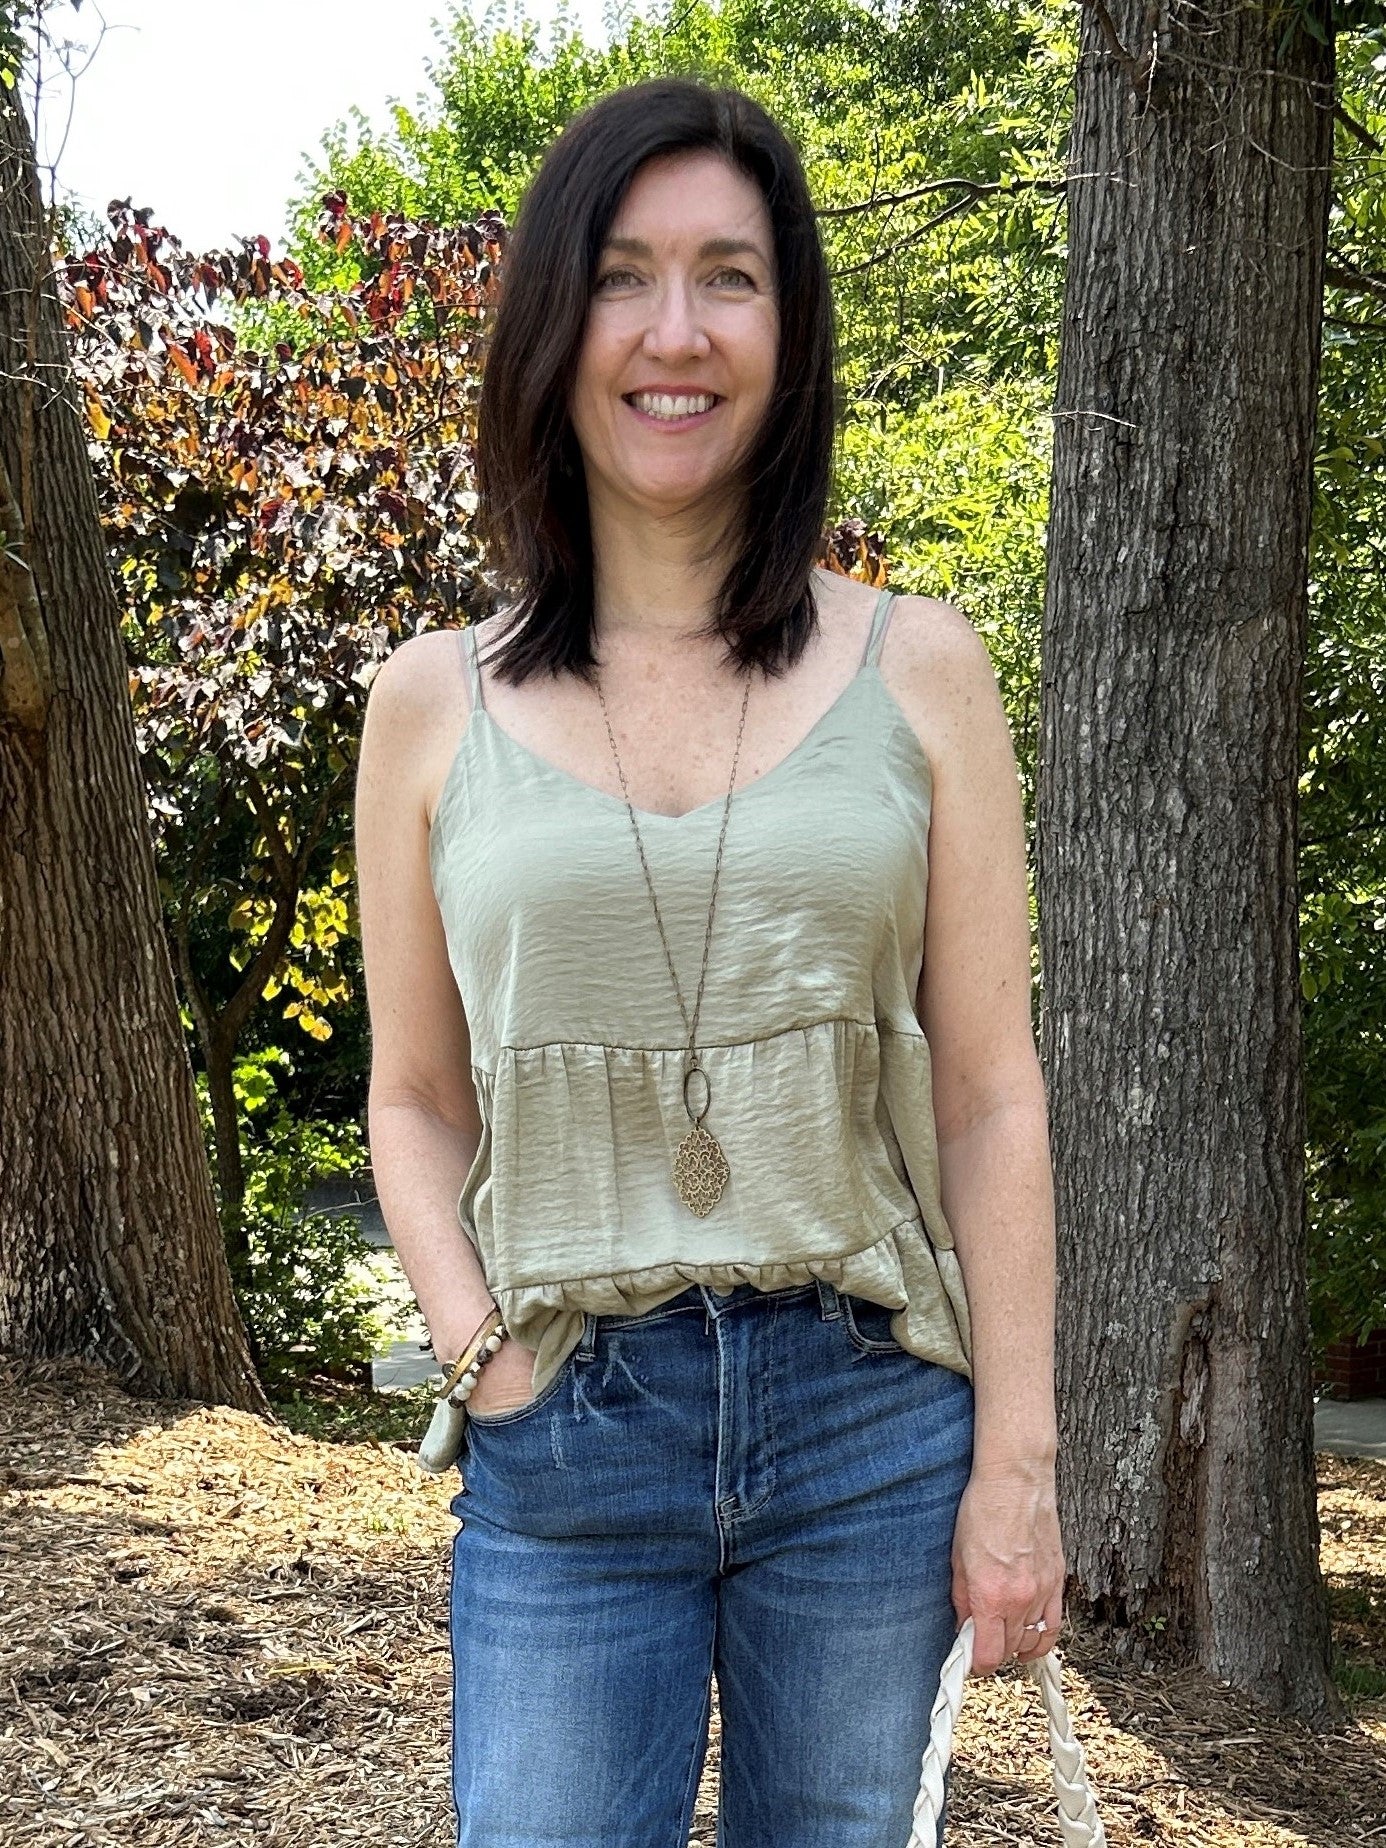 This spaghetti strap top features a delightful tiered bodice and a flowy silhouette, perfect for adding a graceful element to any wardrobe. Crafted in beautiful black and sage colors, this top is sure to be a favorite.  Material: 100% Polyester  Care Instructions: Hand wash cold, line dry